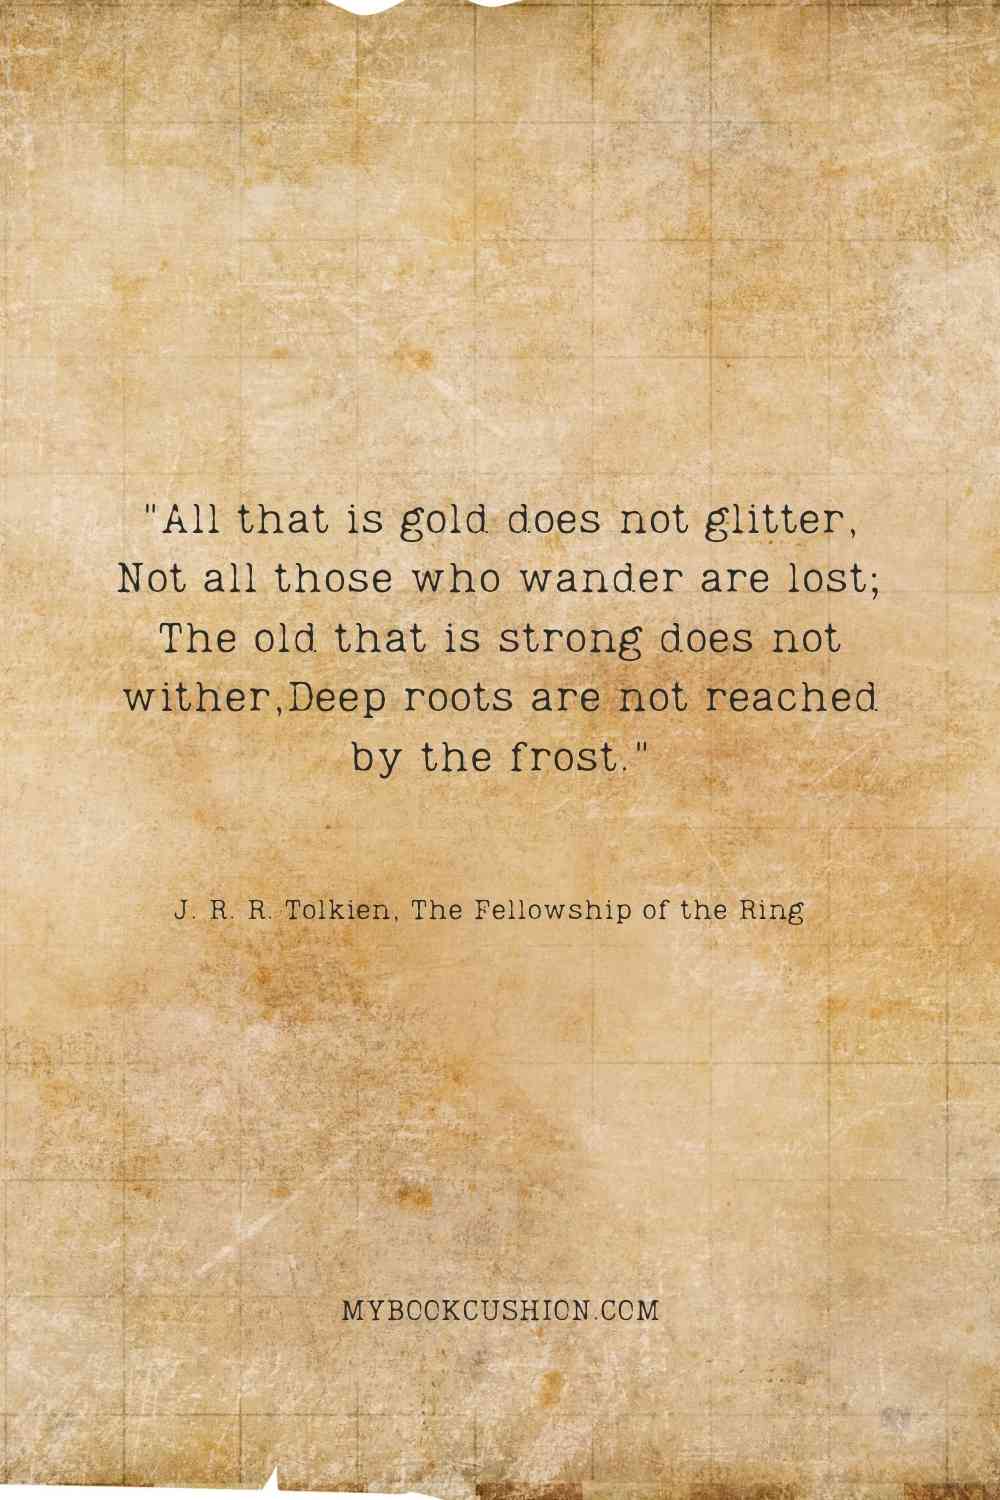 "All that is gold does not glitter, Not all those who wander are lost; The old that is strong does not wither,Deep roots are not reached by the frost." - J. R. R. Tolkien, The Fellowship of the Ring